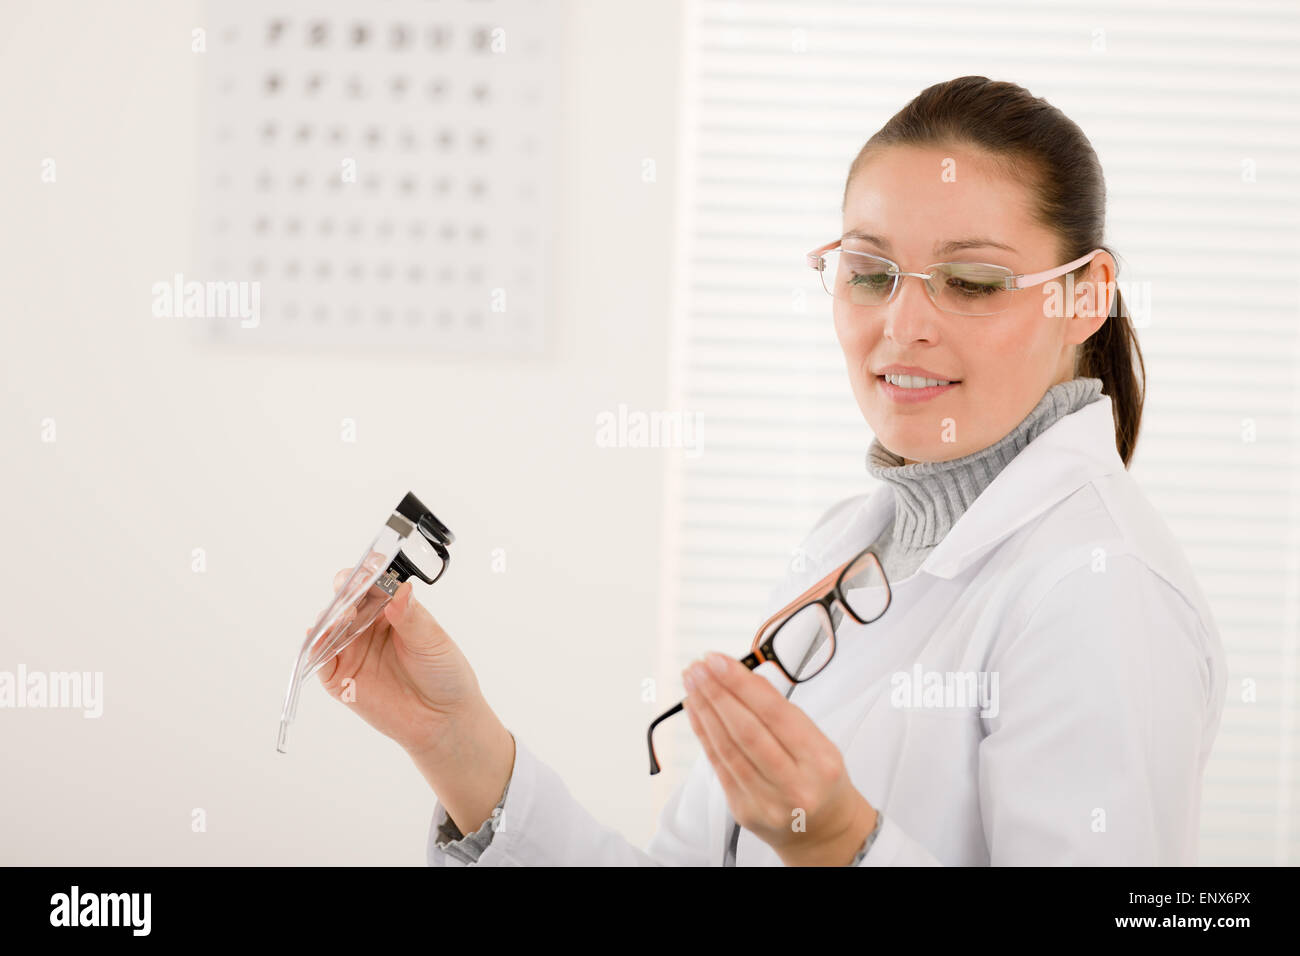 Optician doctor woman with glasses and eye chart Stock Photo